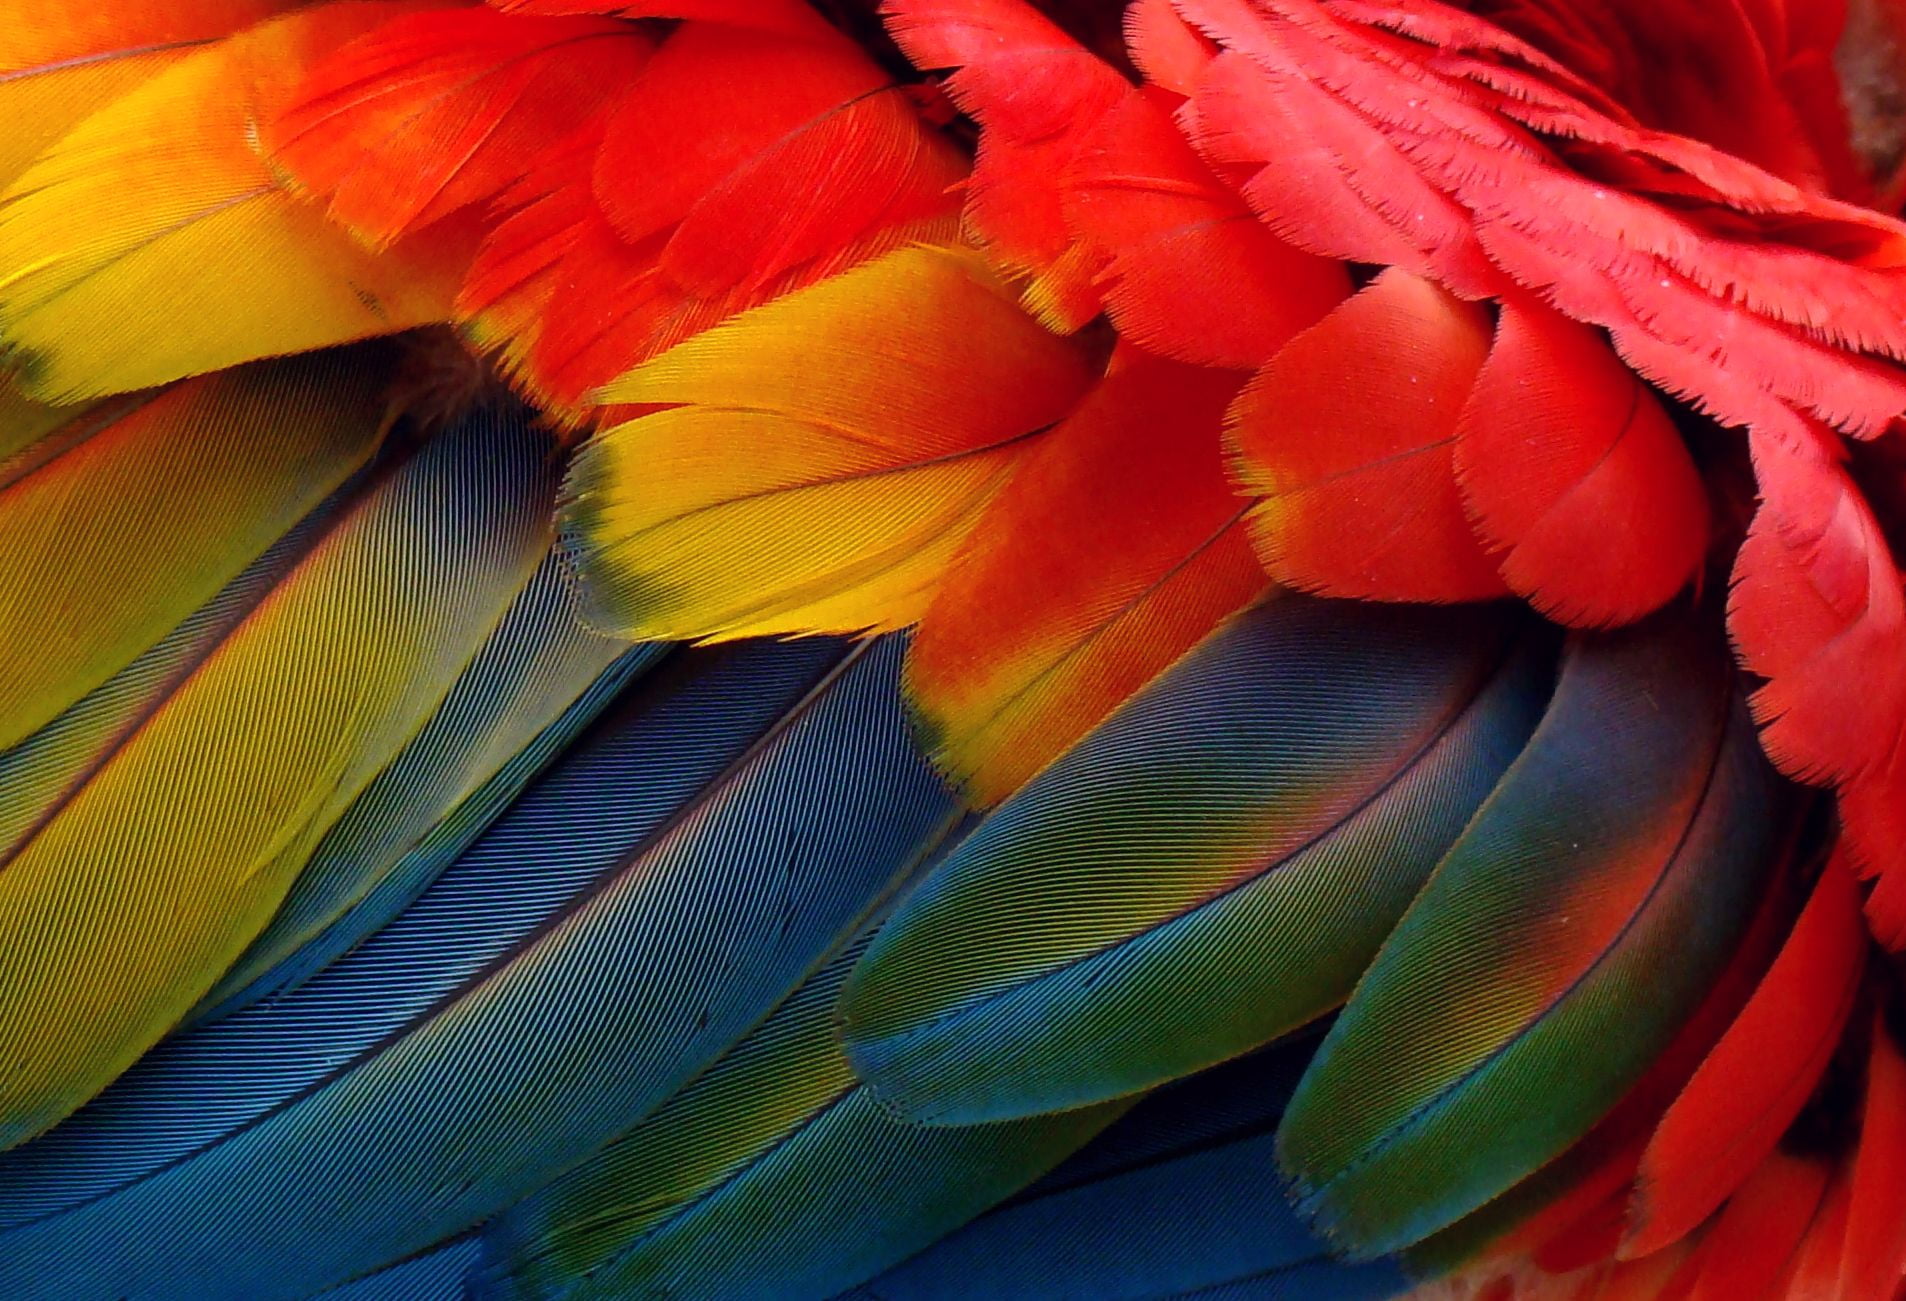 HD Wallpaper Yellow And Blue Scarlet Macaw Bird Parrot Colorful